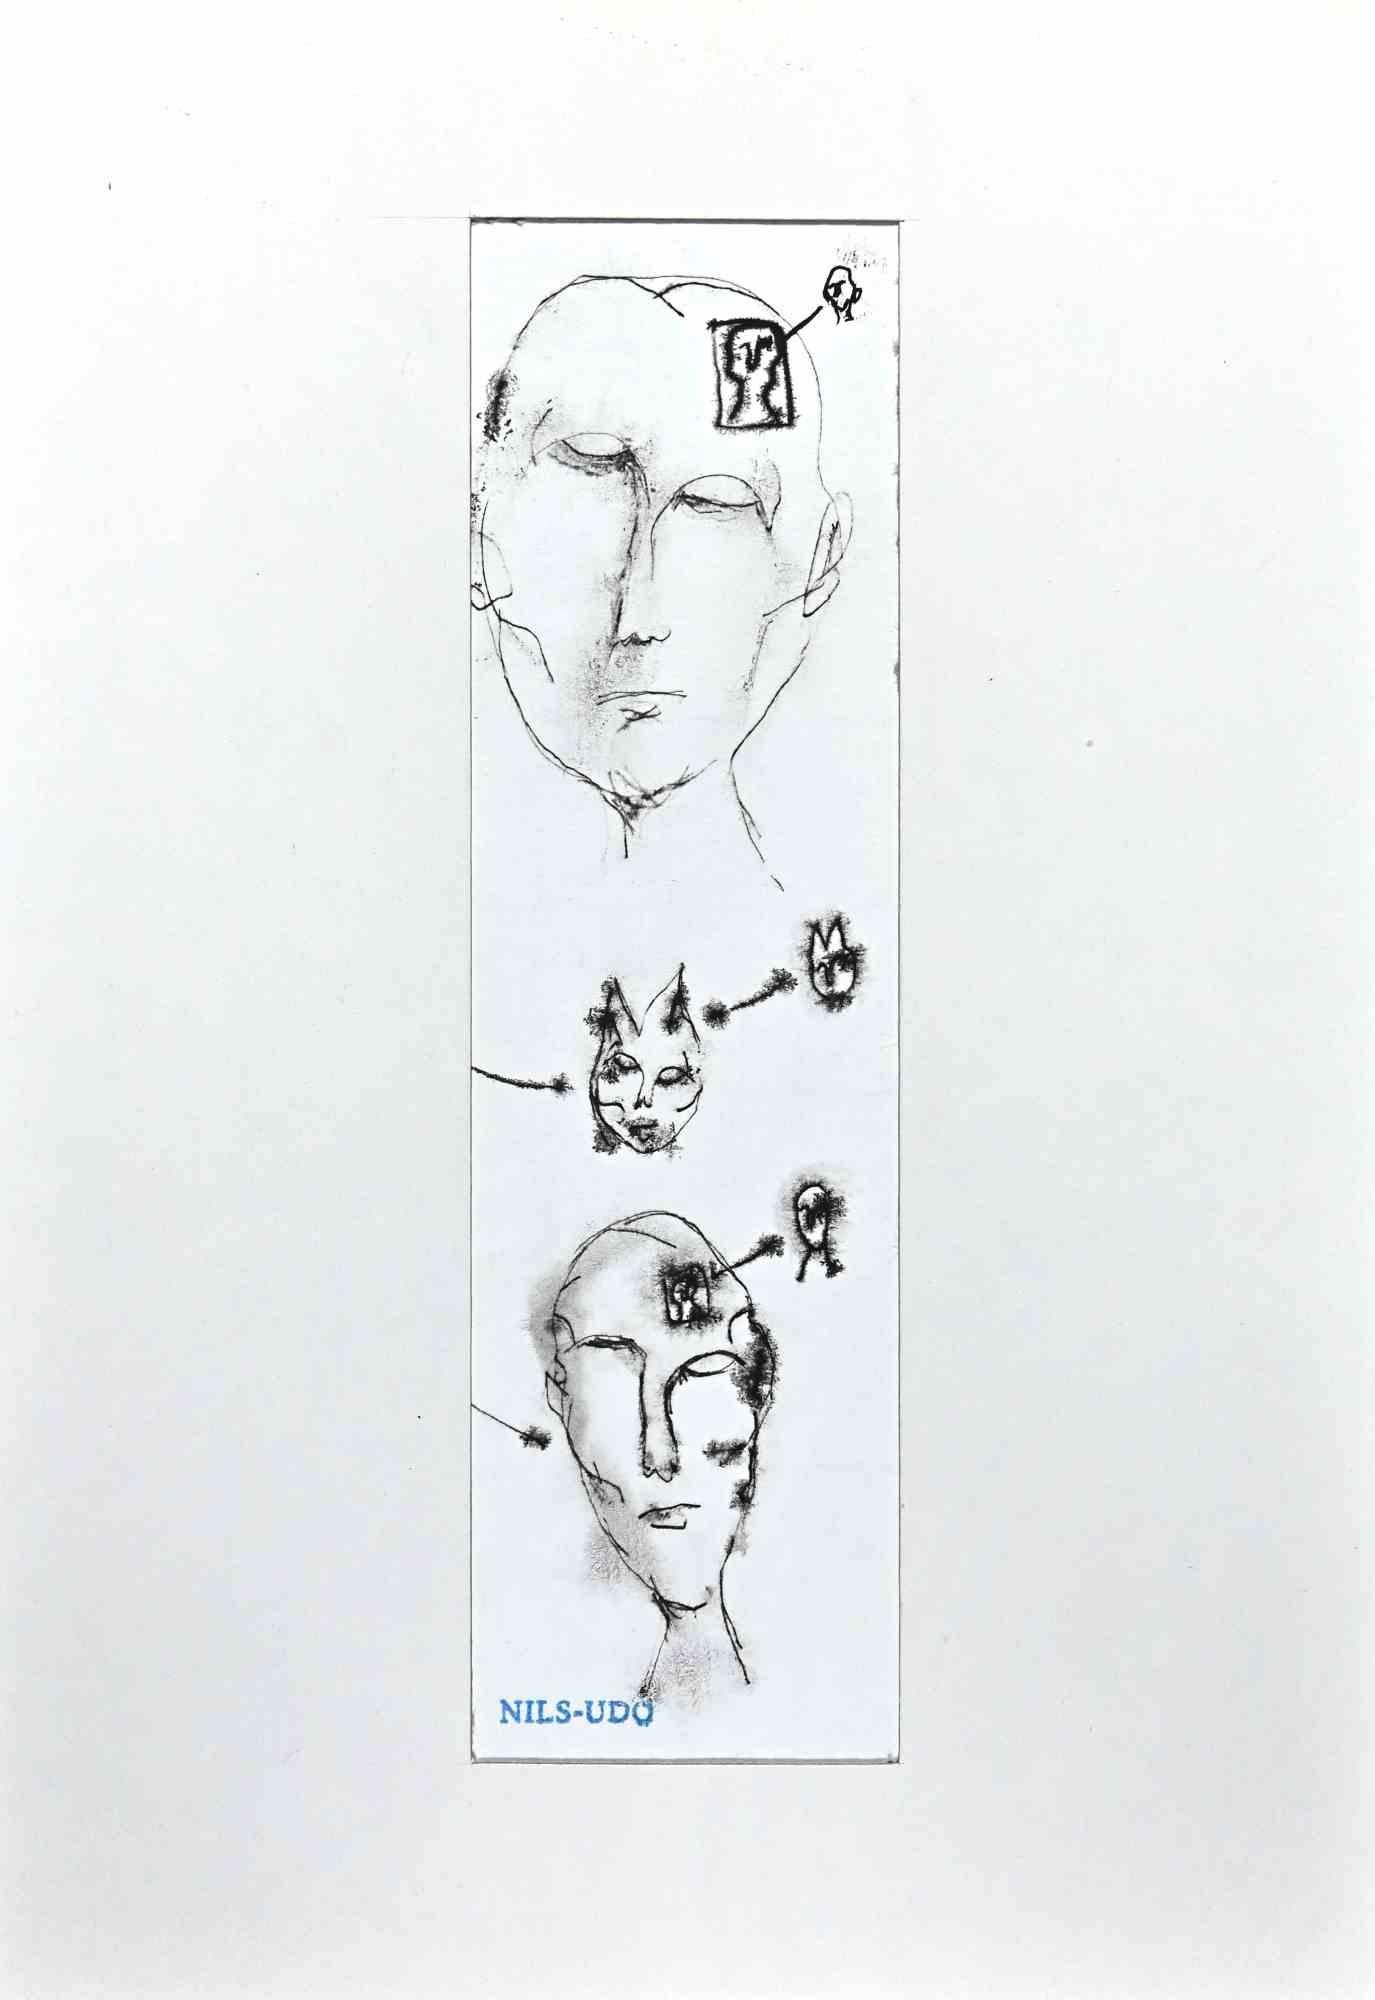 The Heads and Thoughts is an original drawing by Nils-Udo in Late 20th Century.

Drawing in China Ink.

Good conditions. Artist stamp lower left.

Included a Passepartout: 29 x 21 cm.

The artwork is depicted through deft and confident strokes.